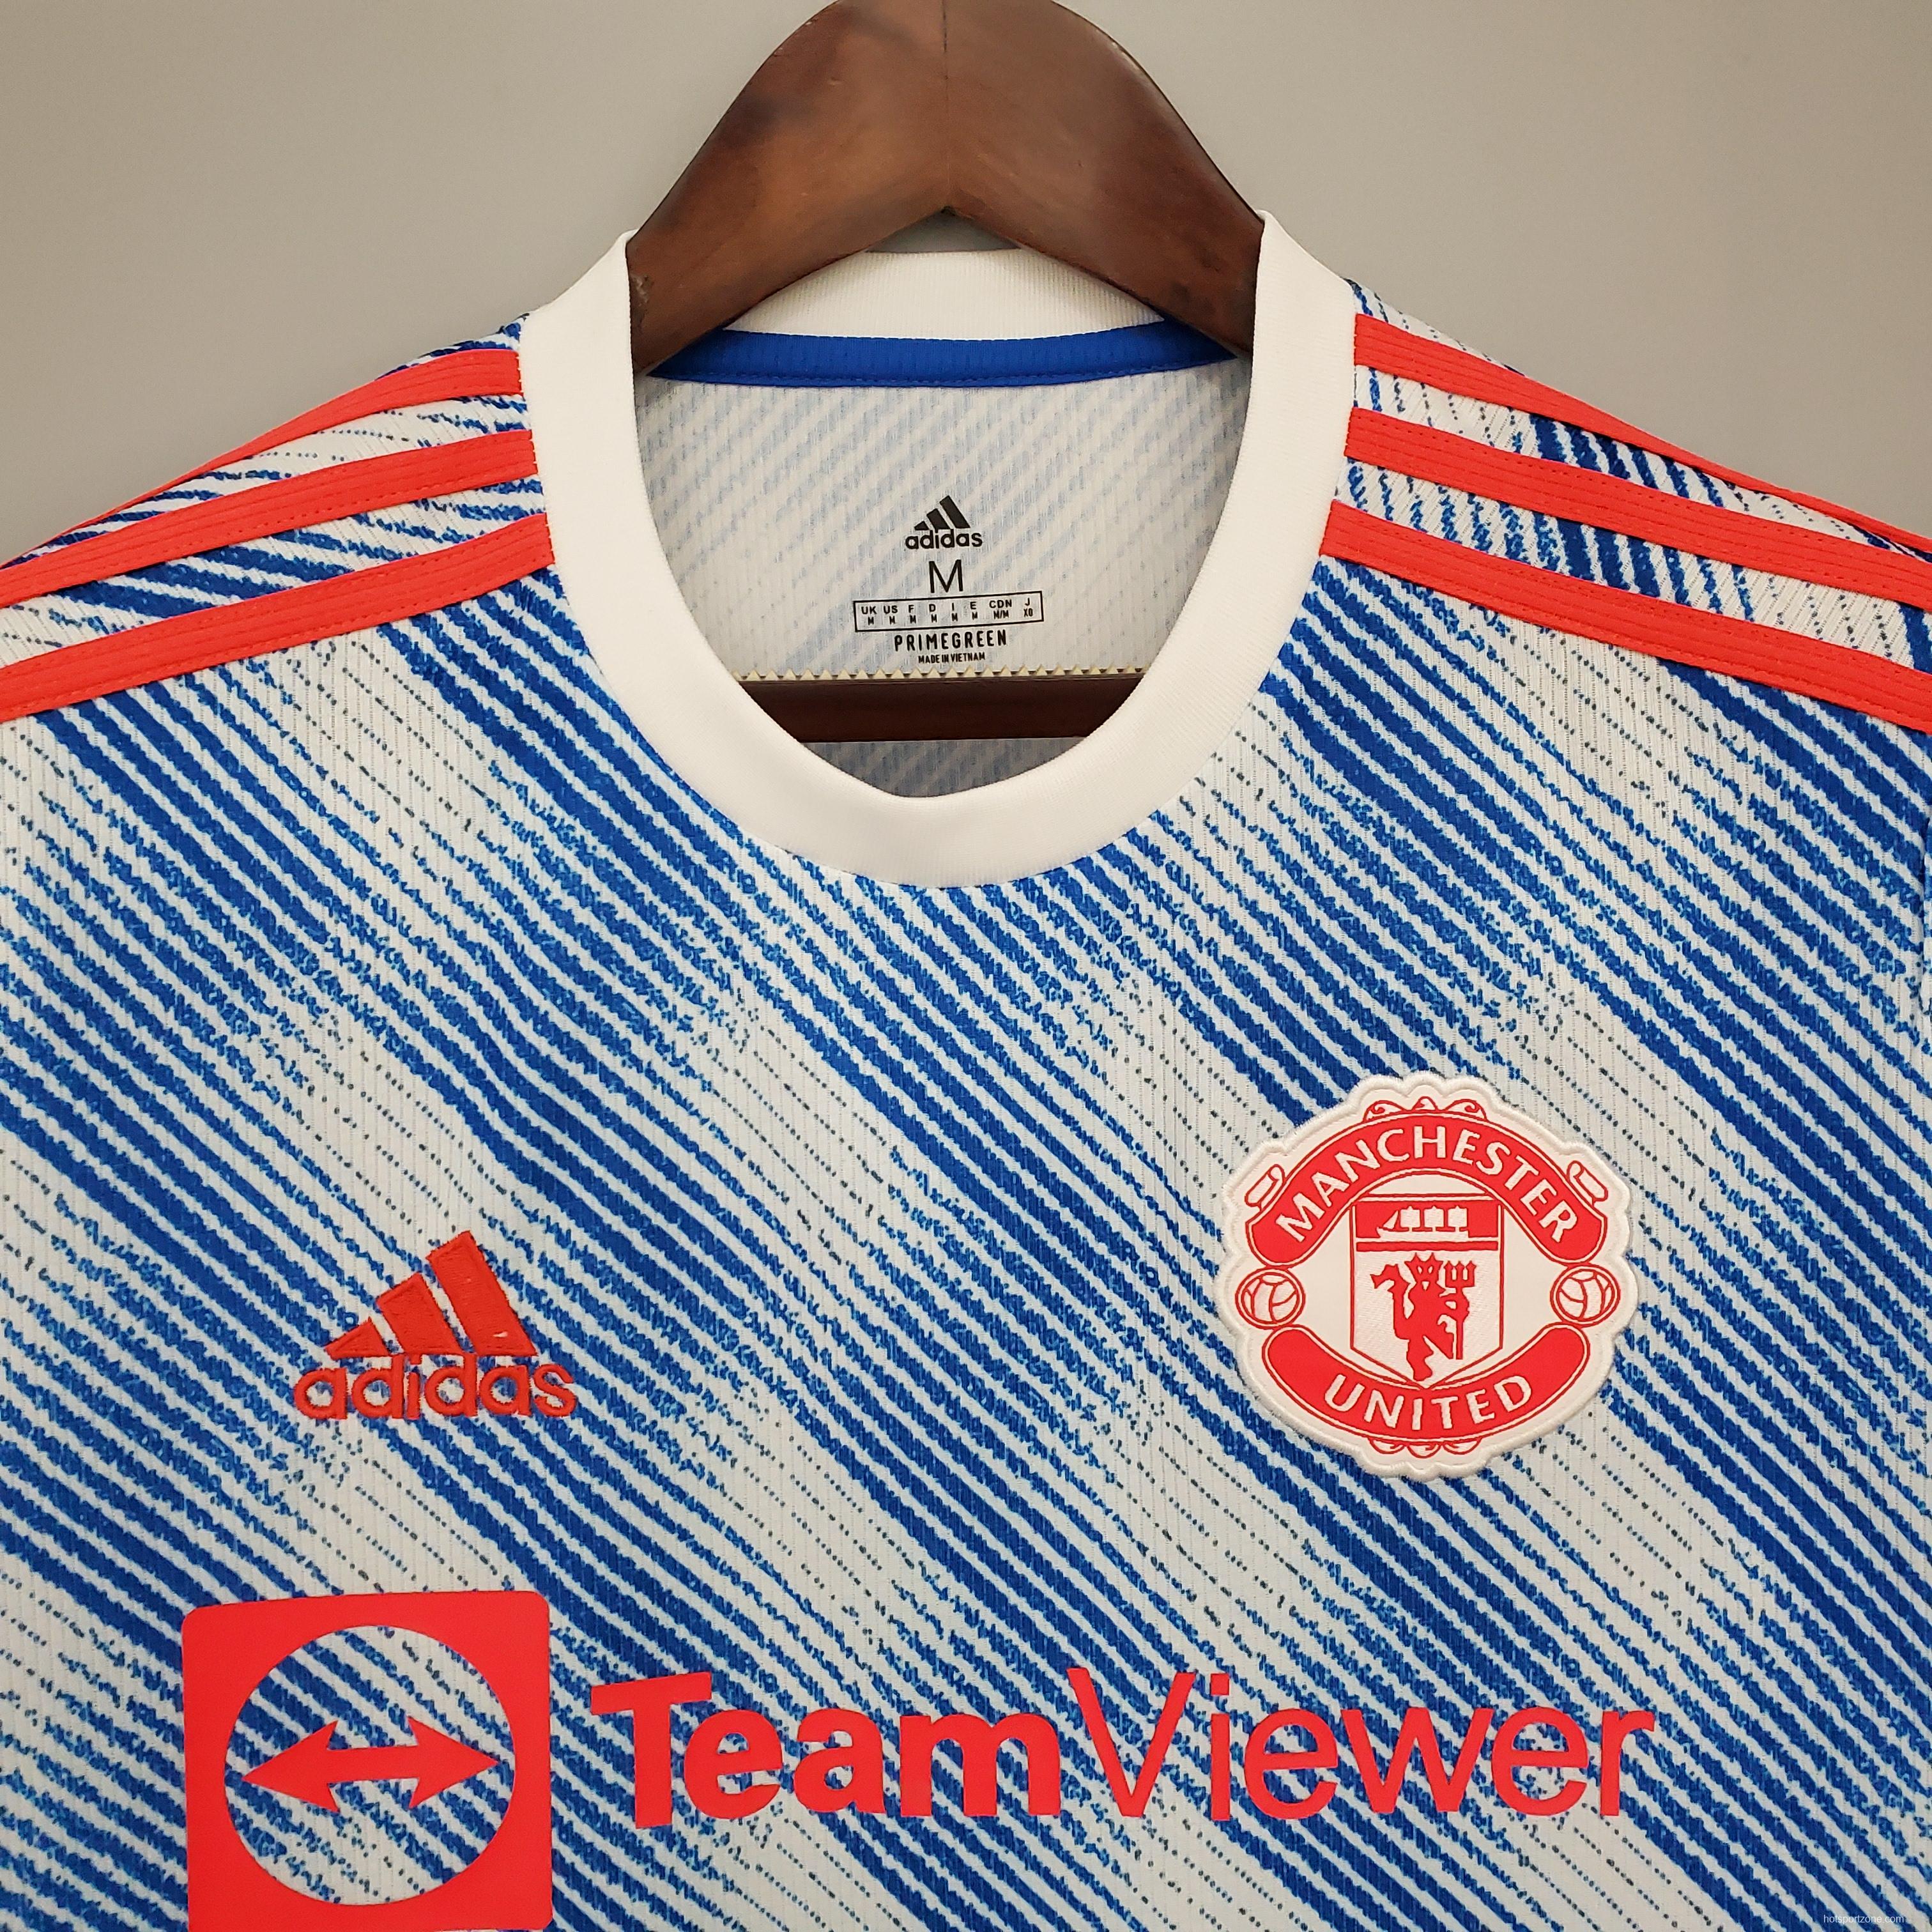 21/22 Manchester United away Soccer Jersey